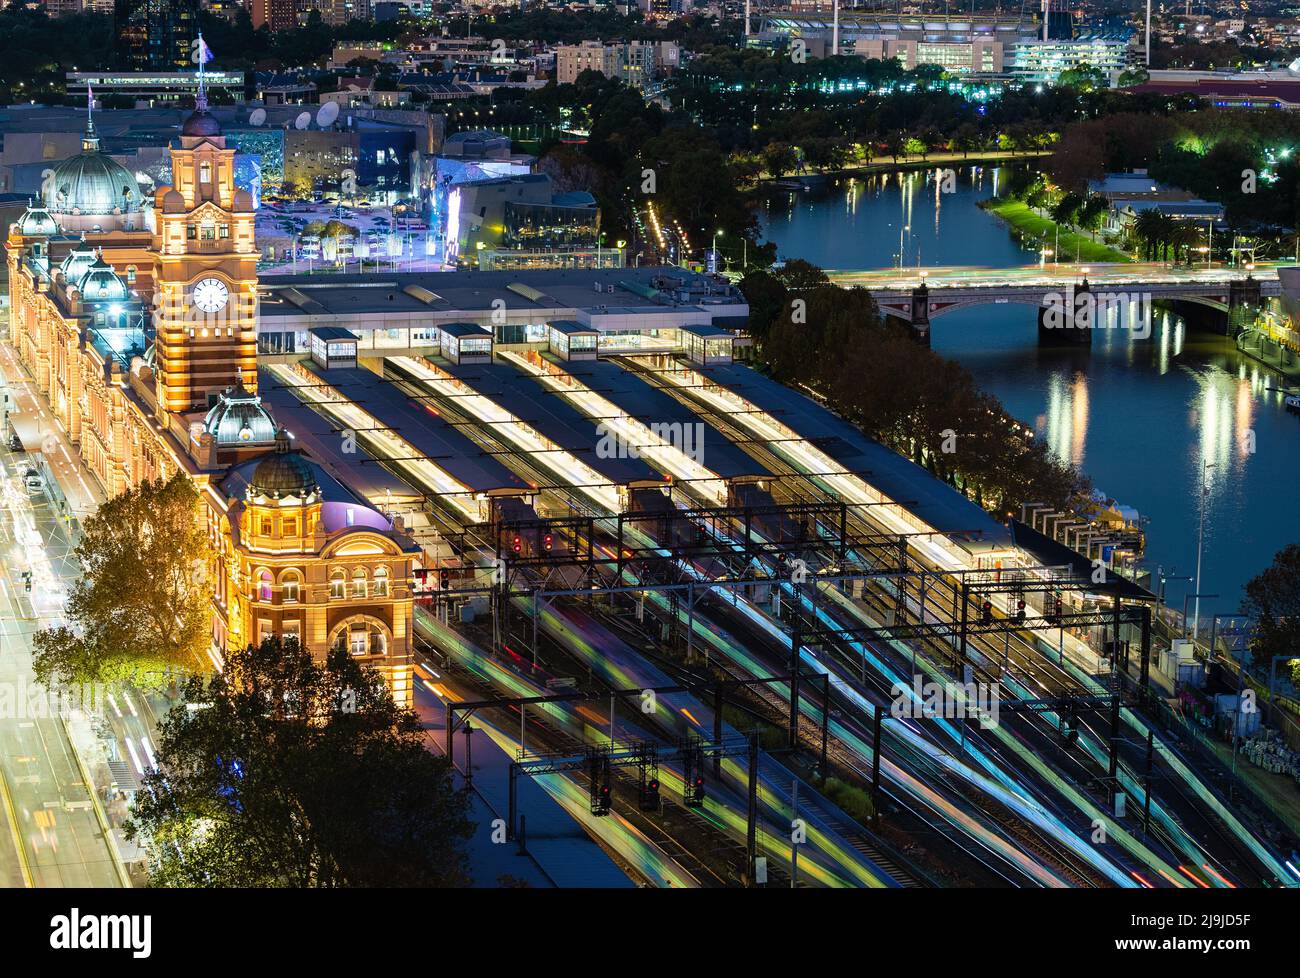 Melbourne, Australia - May 2, 2022: Flinders Street Railway Station in Melbourne CBD at night, multiple photos stacked to create train light trails Stock Photo